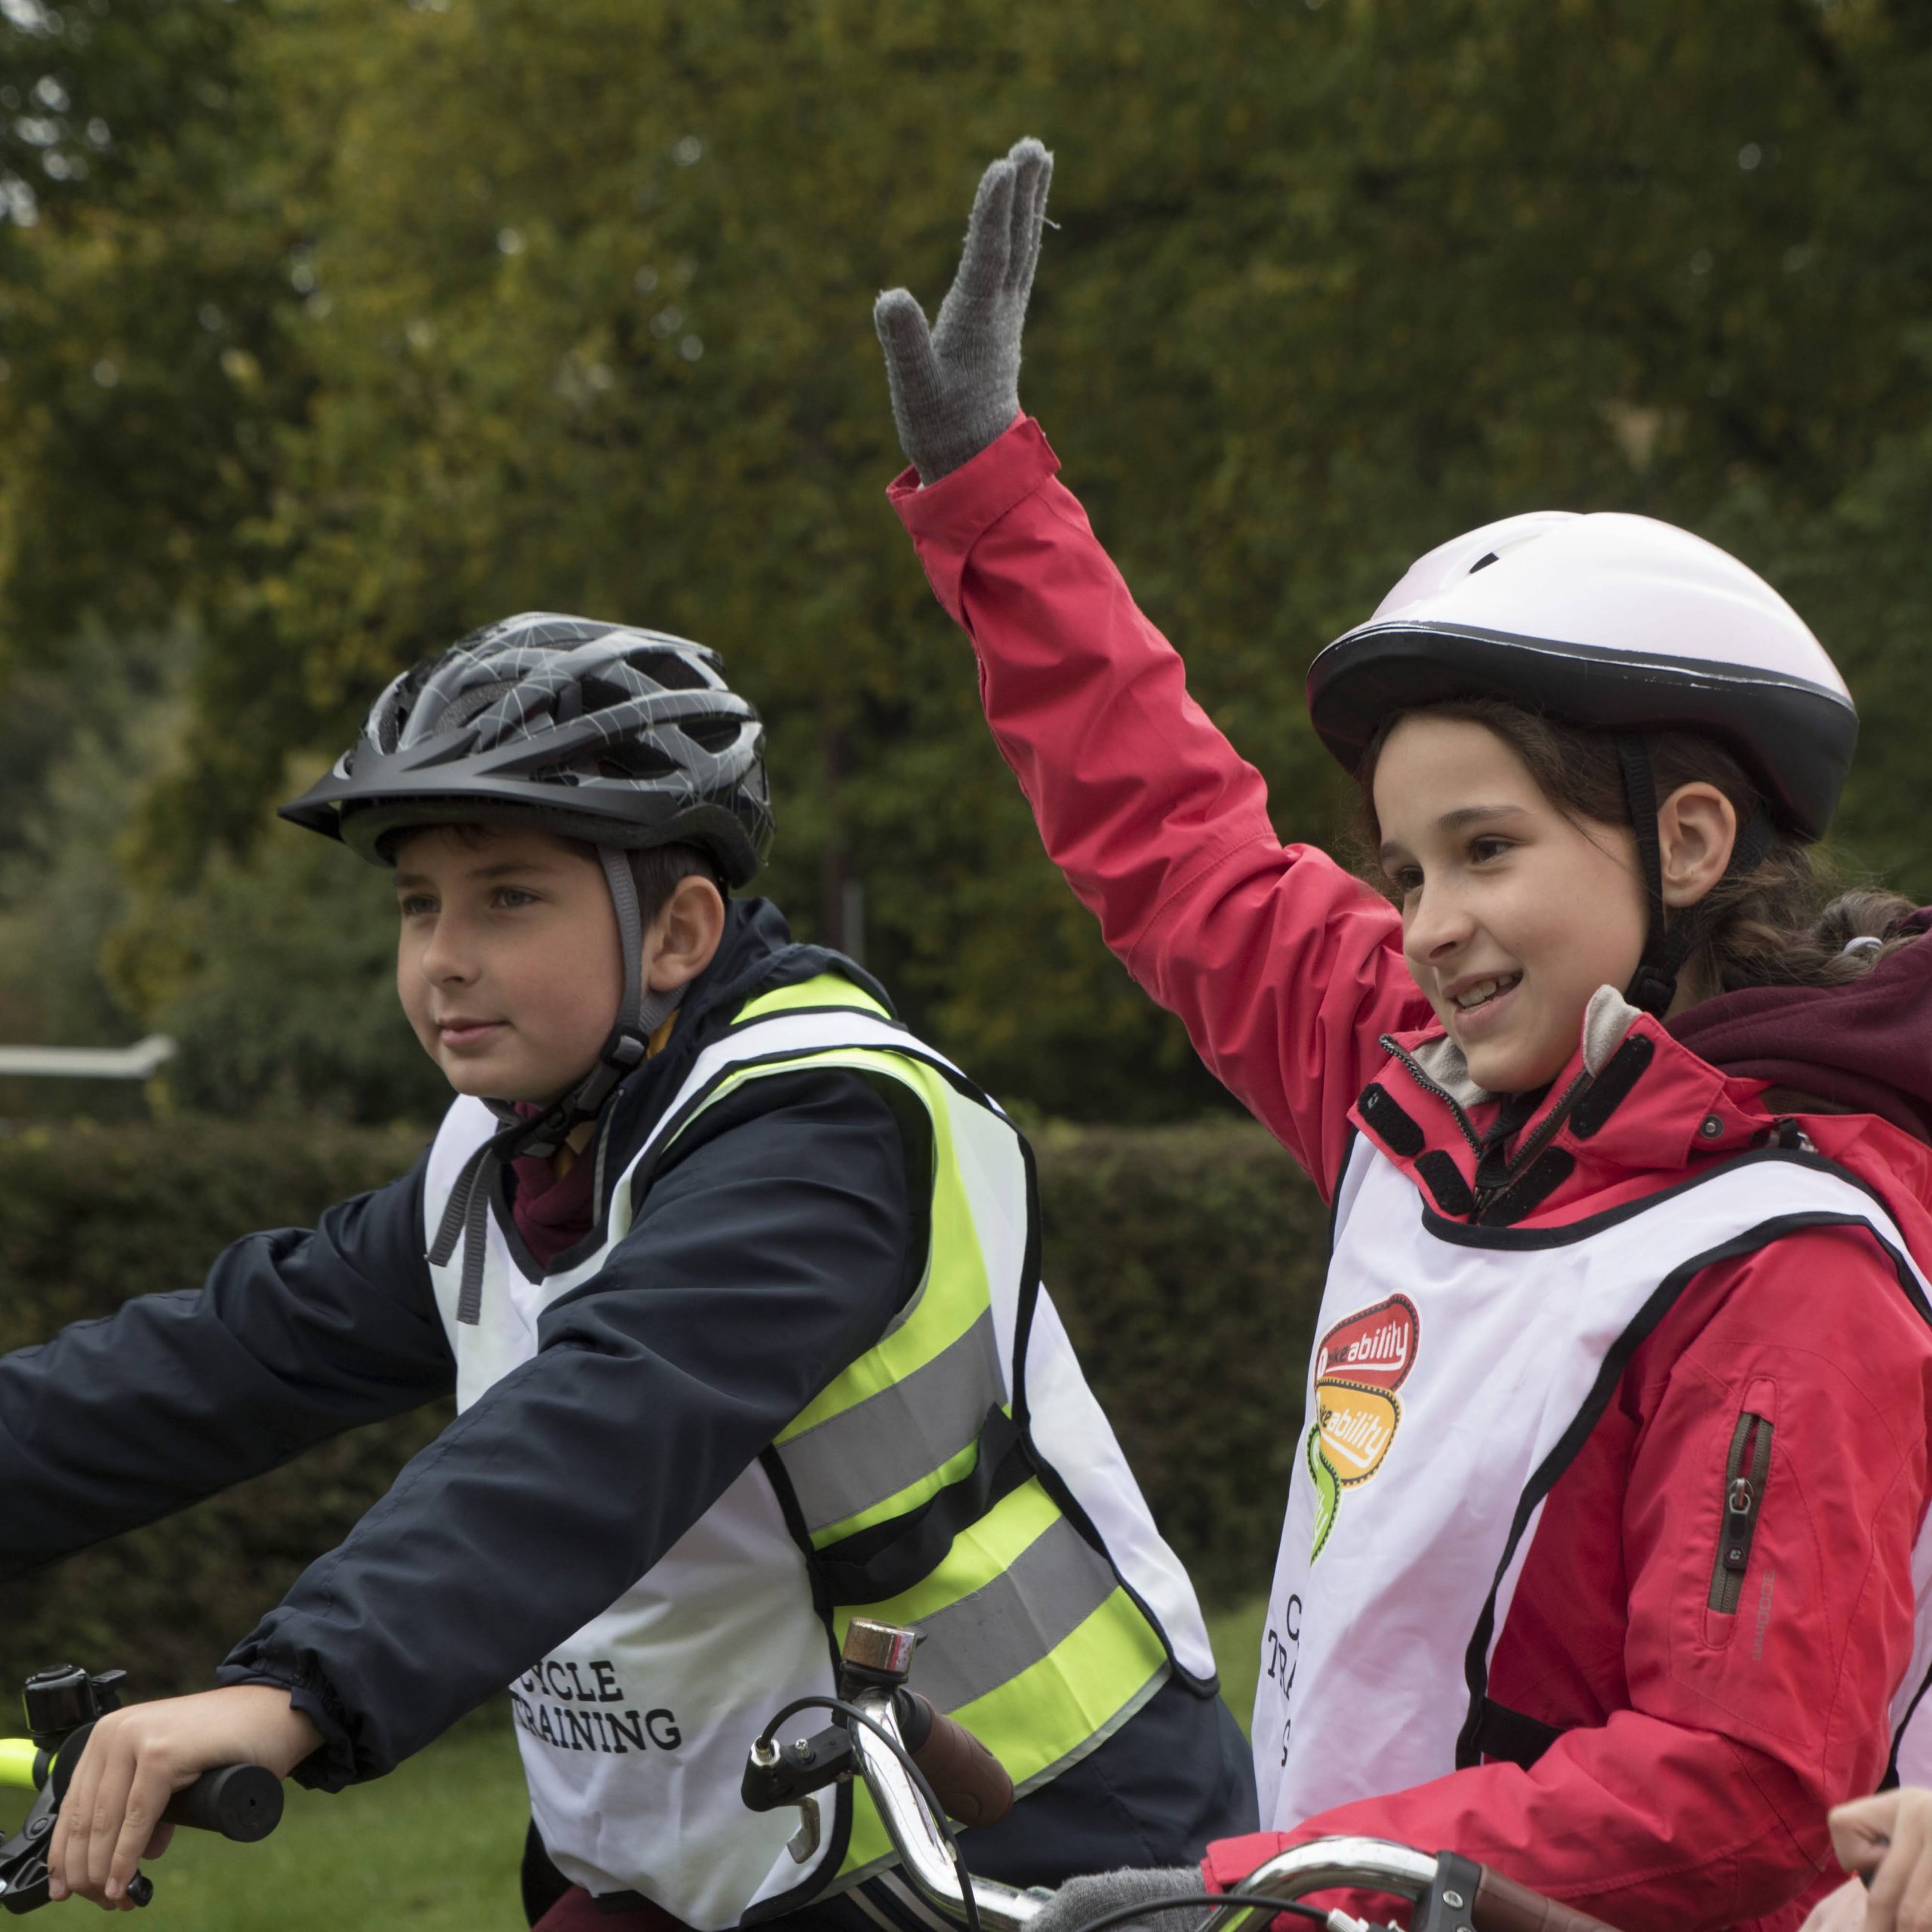 A boy and a girl wearing helmets on bikes during a Bikeability session.